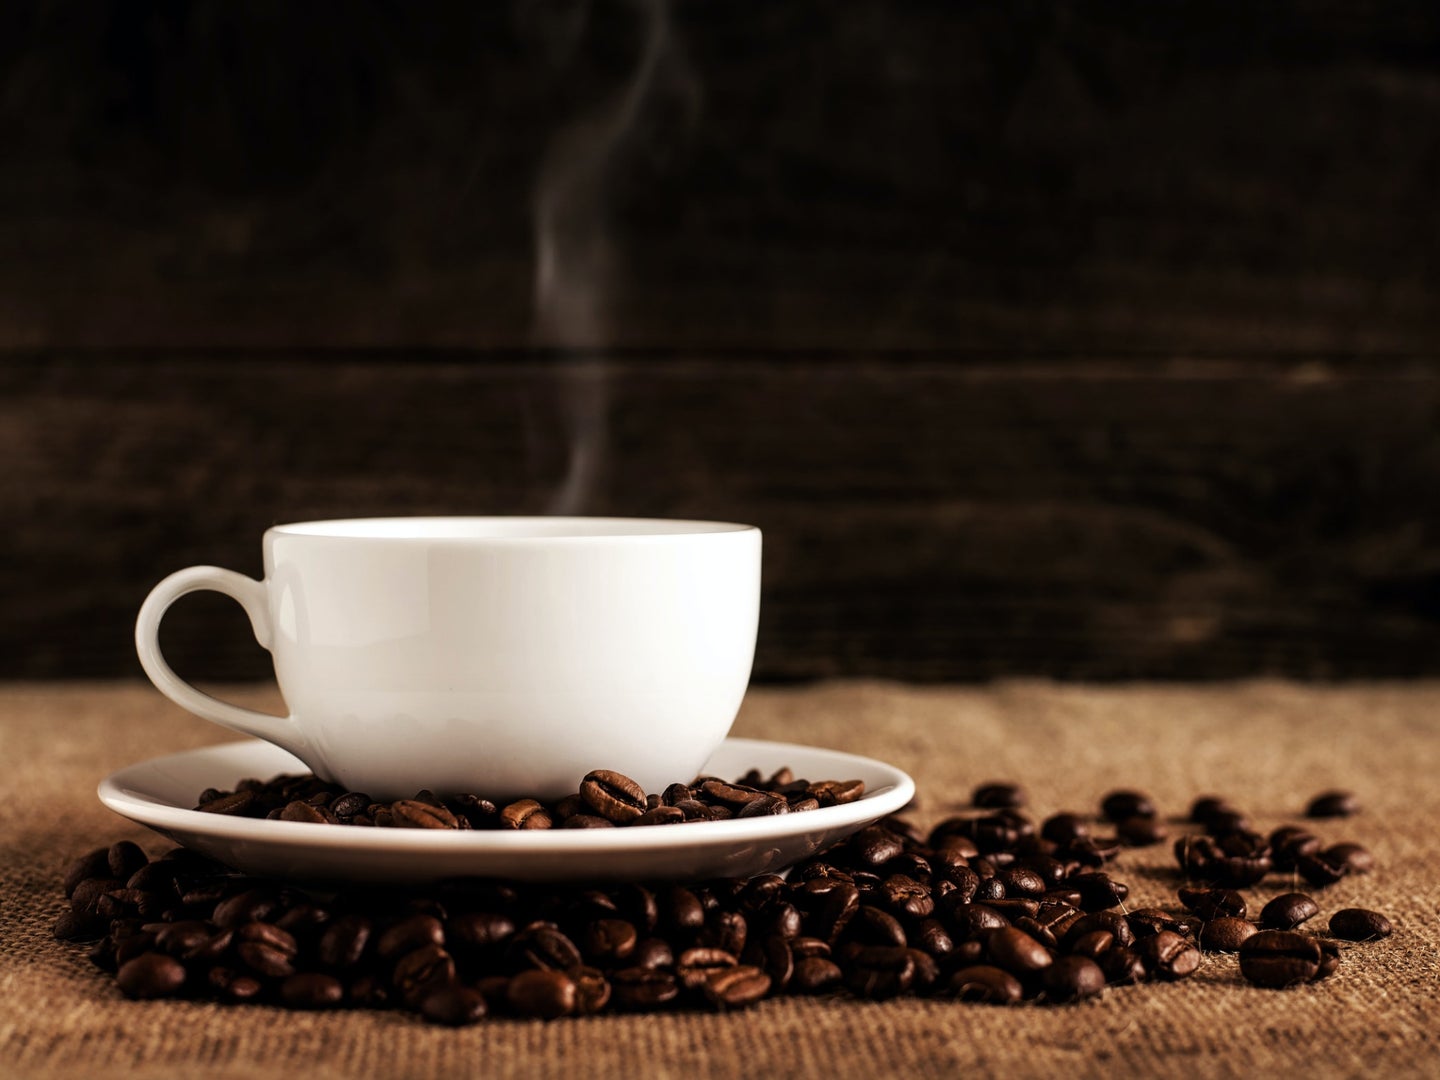 A white mug full of hot coffee on a white saucer, surrounded by roasted coffee beans.